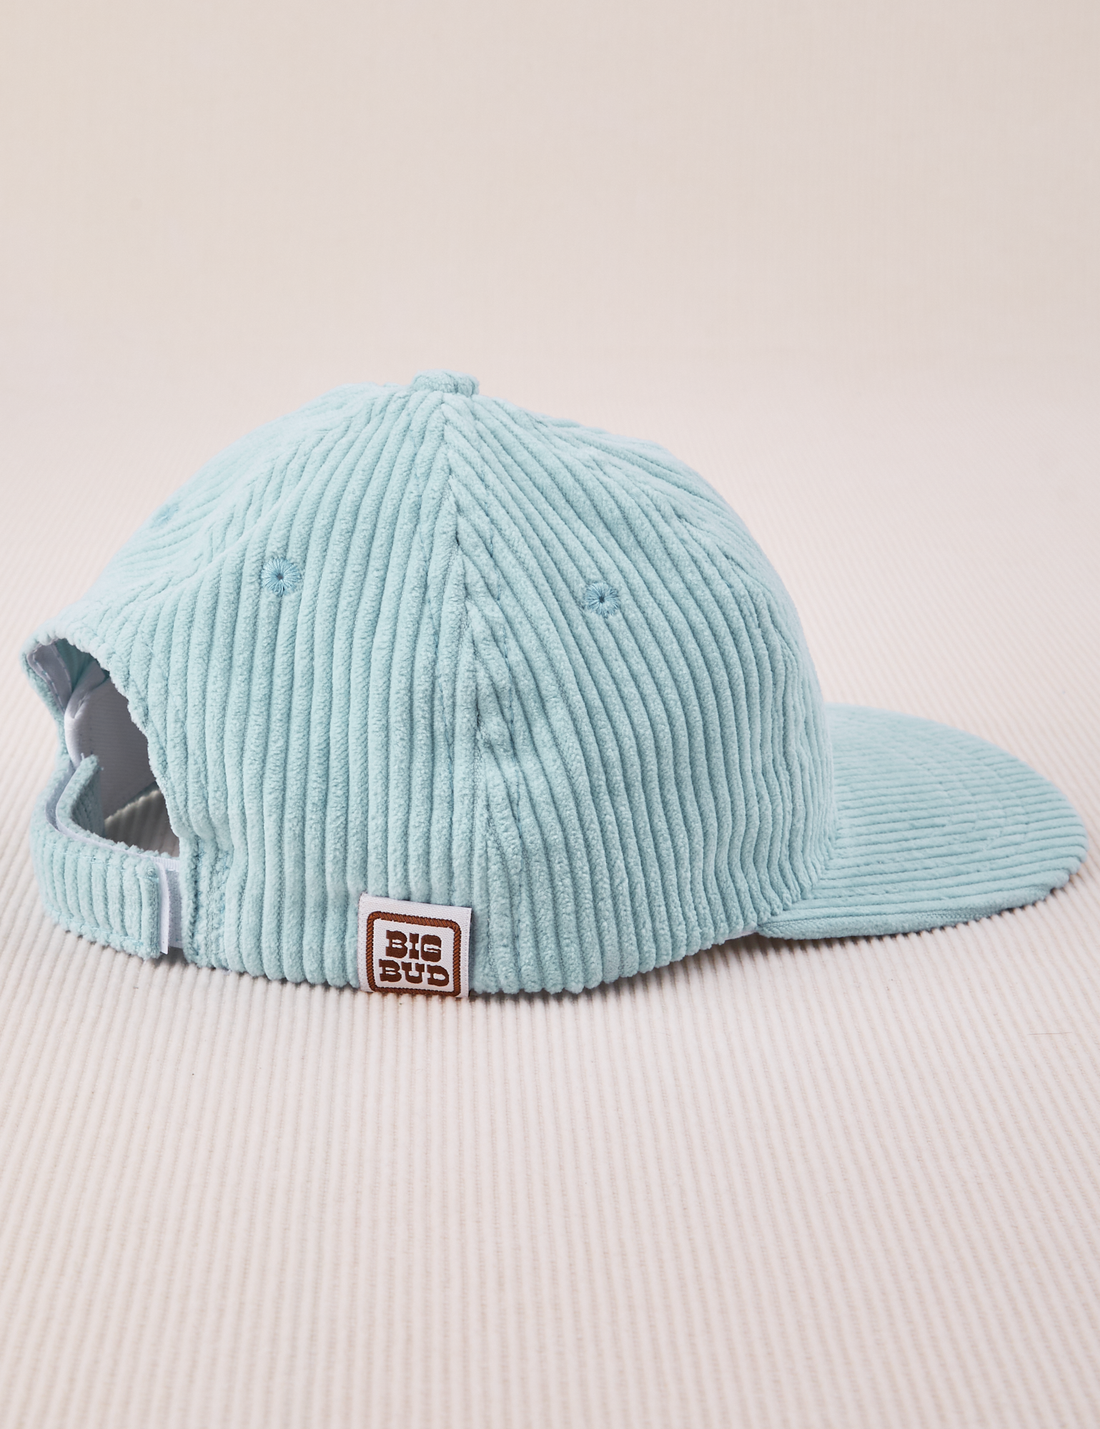 Side view of Dugout Corduroy Hat in Baby Blue. Big Bud label sewn on edge of hat.